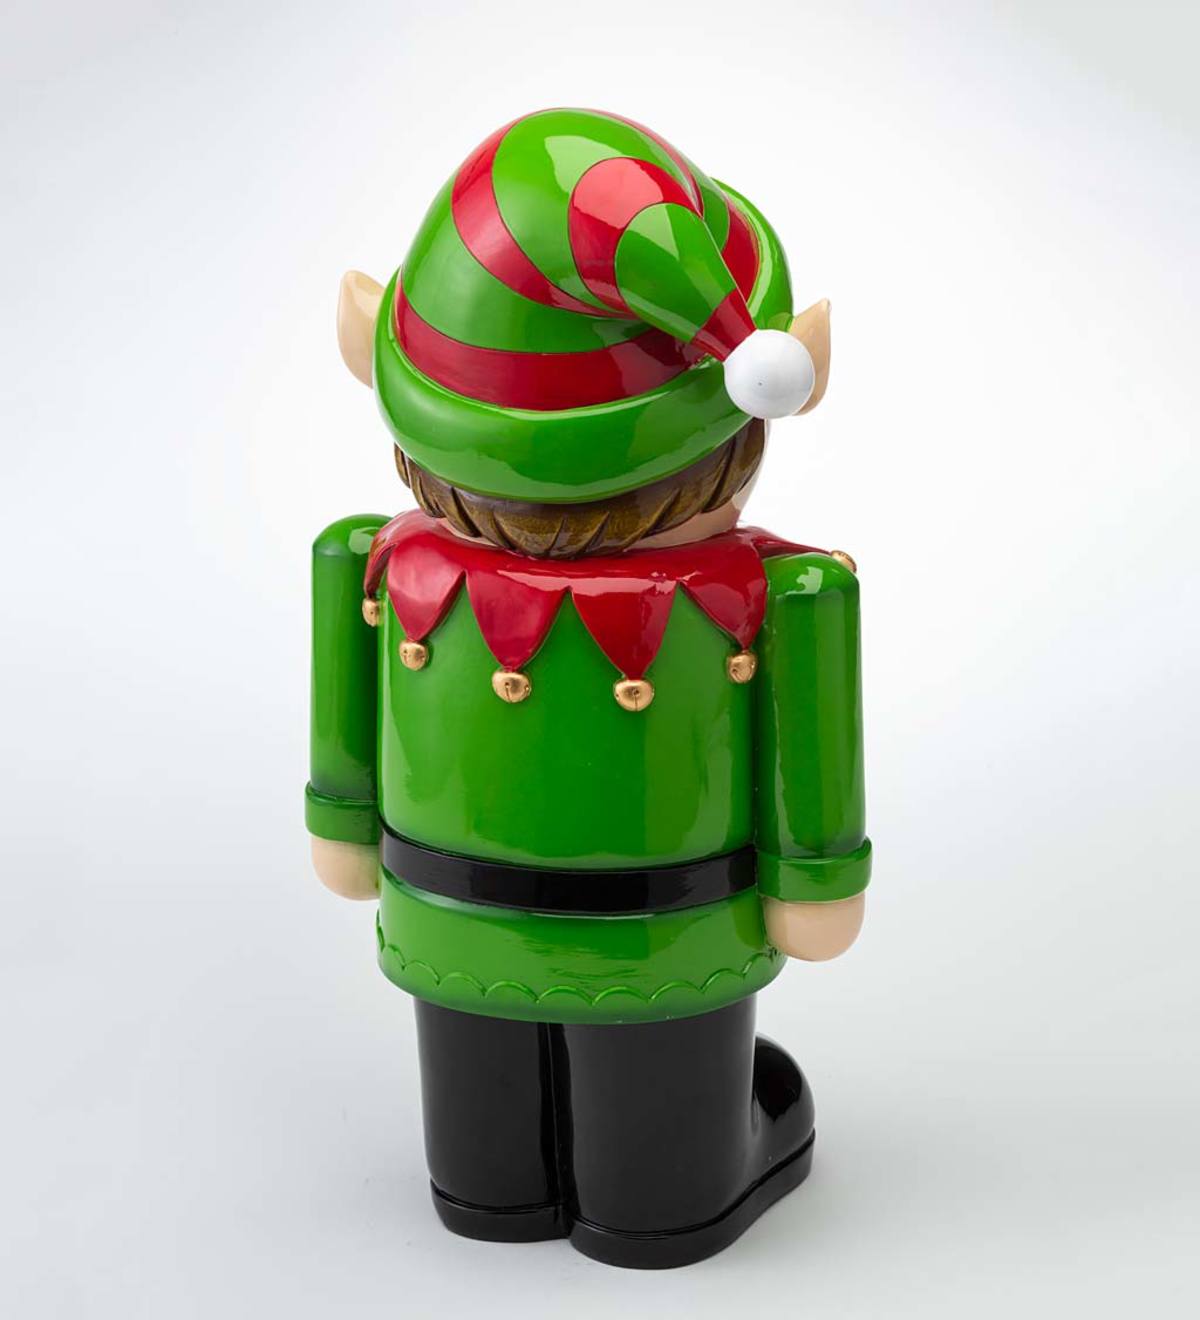 Indoor/Outdoor Lighted Shorty Elf Holiday Statue | Plow & Hearth